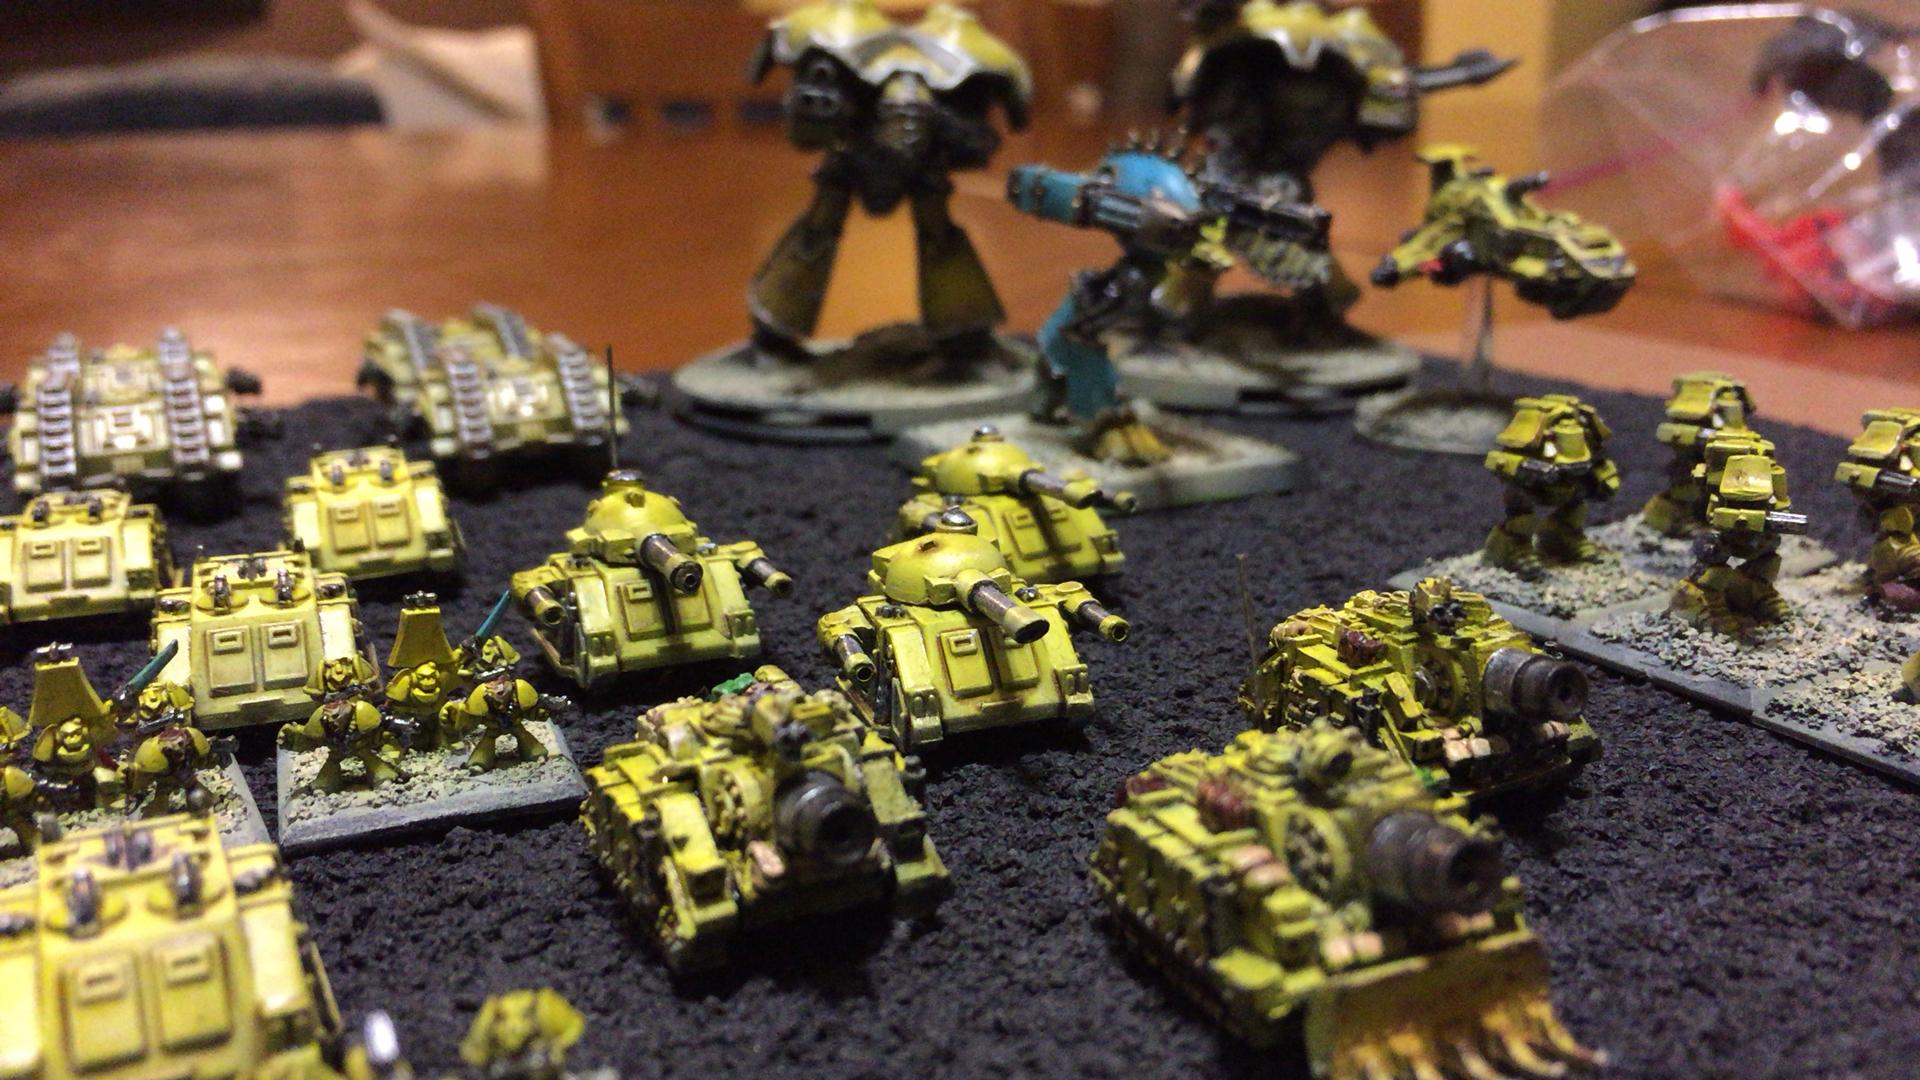 Epic, Imperial Fist Epic, Imperial Fists, Space Marines